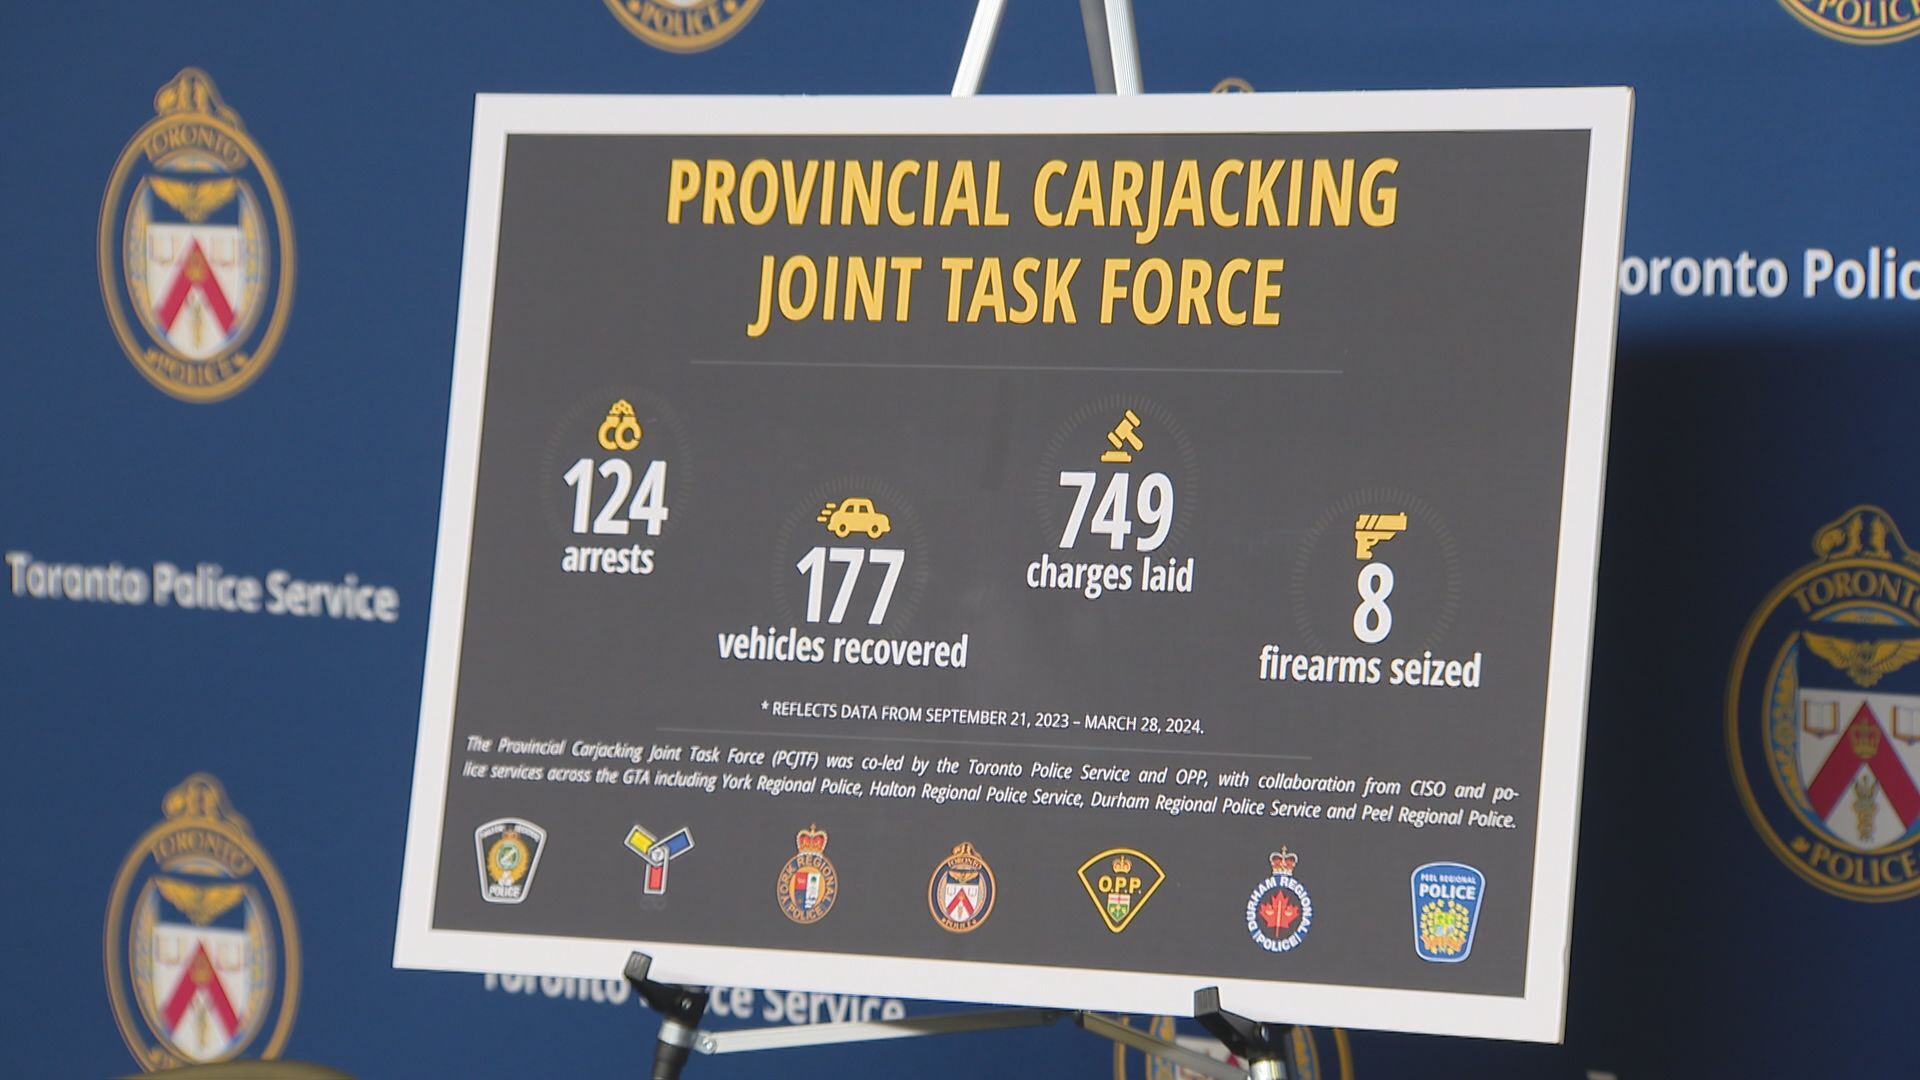 124 arrested by carjacking task force, nearly 30% are minors: police